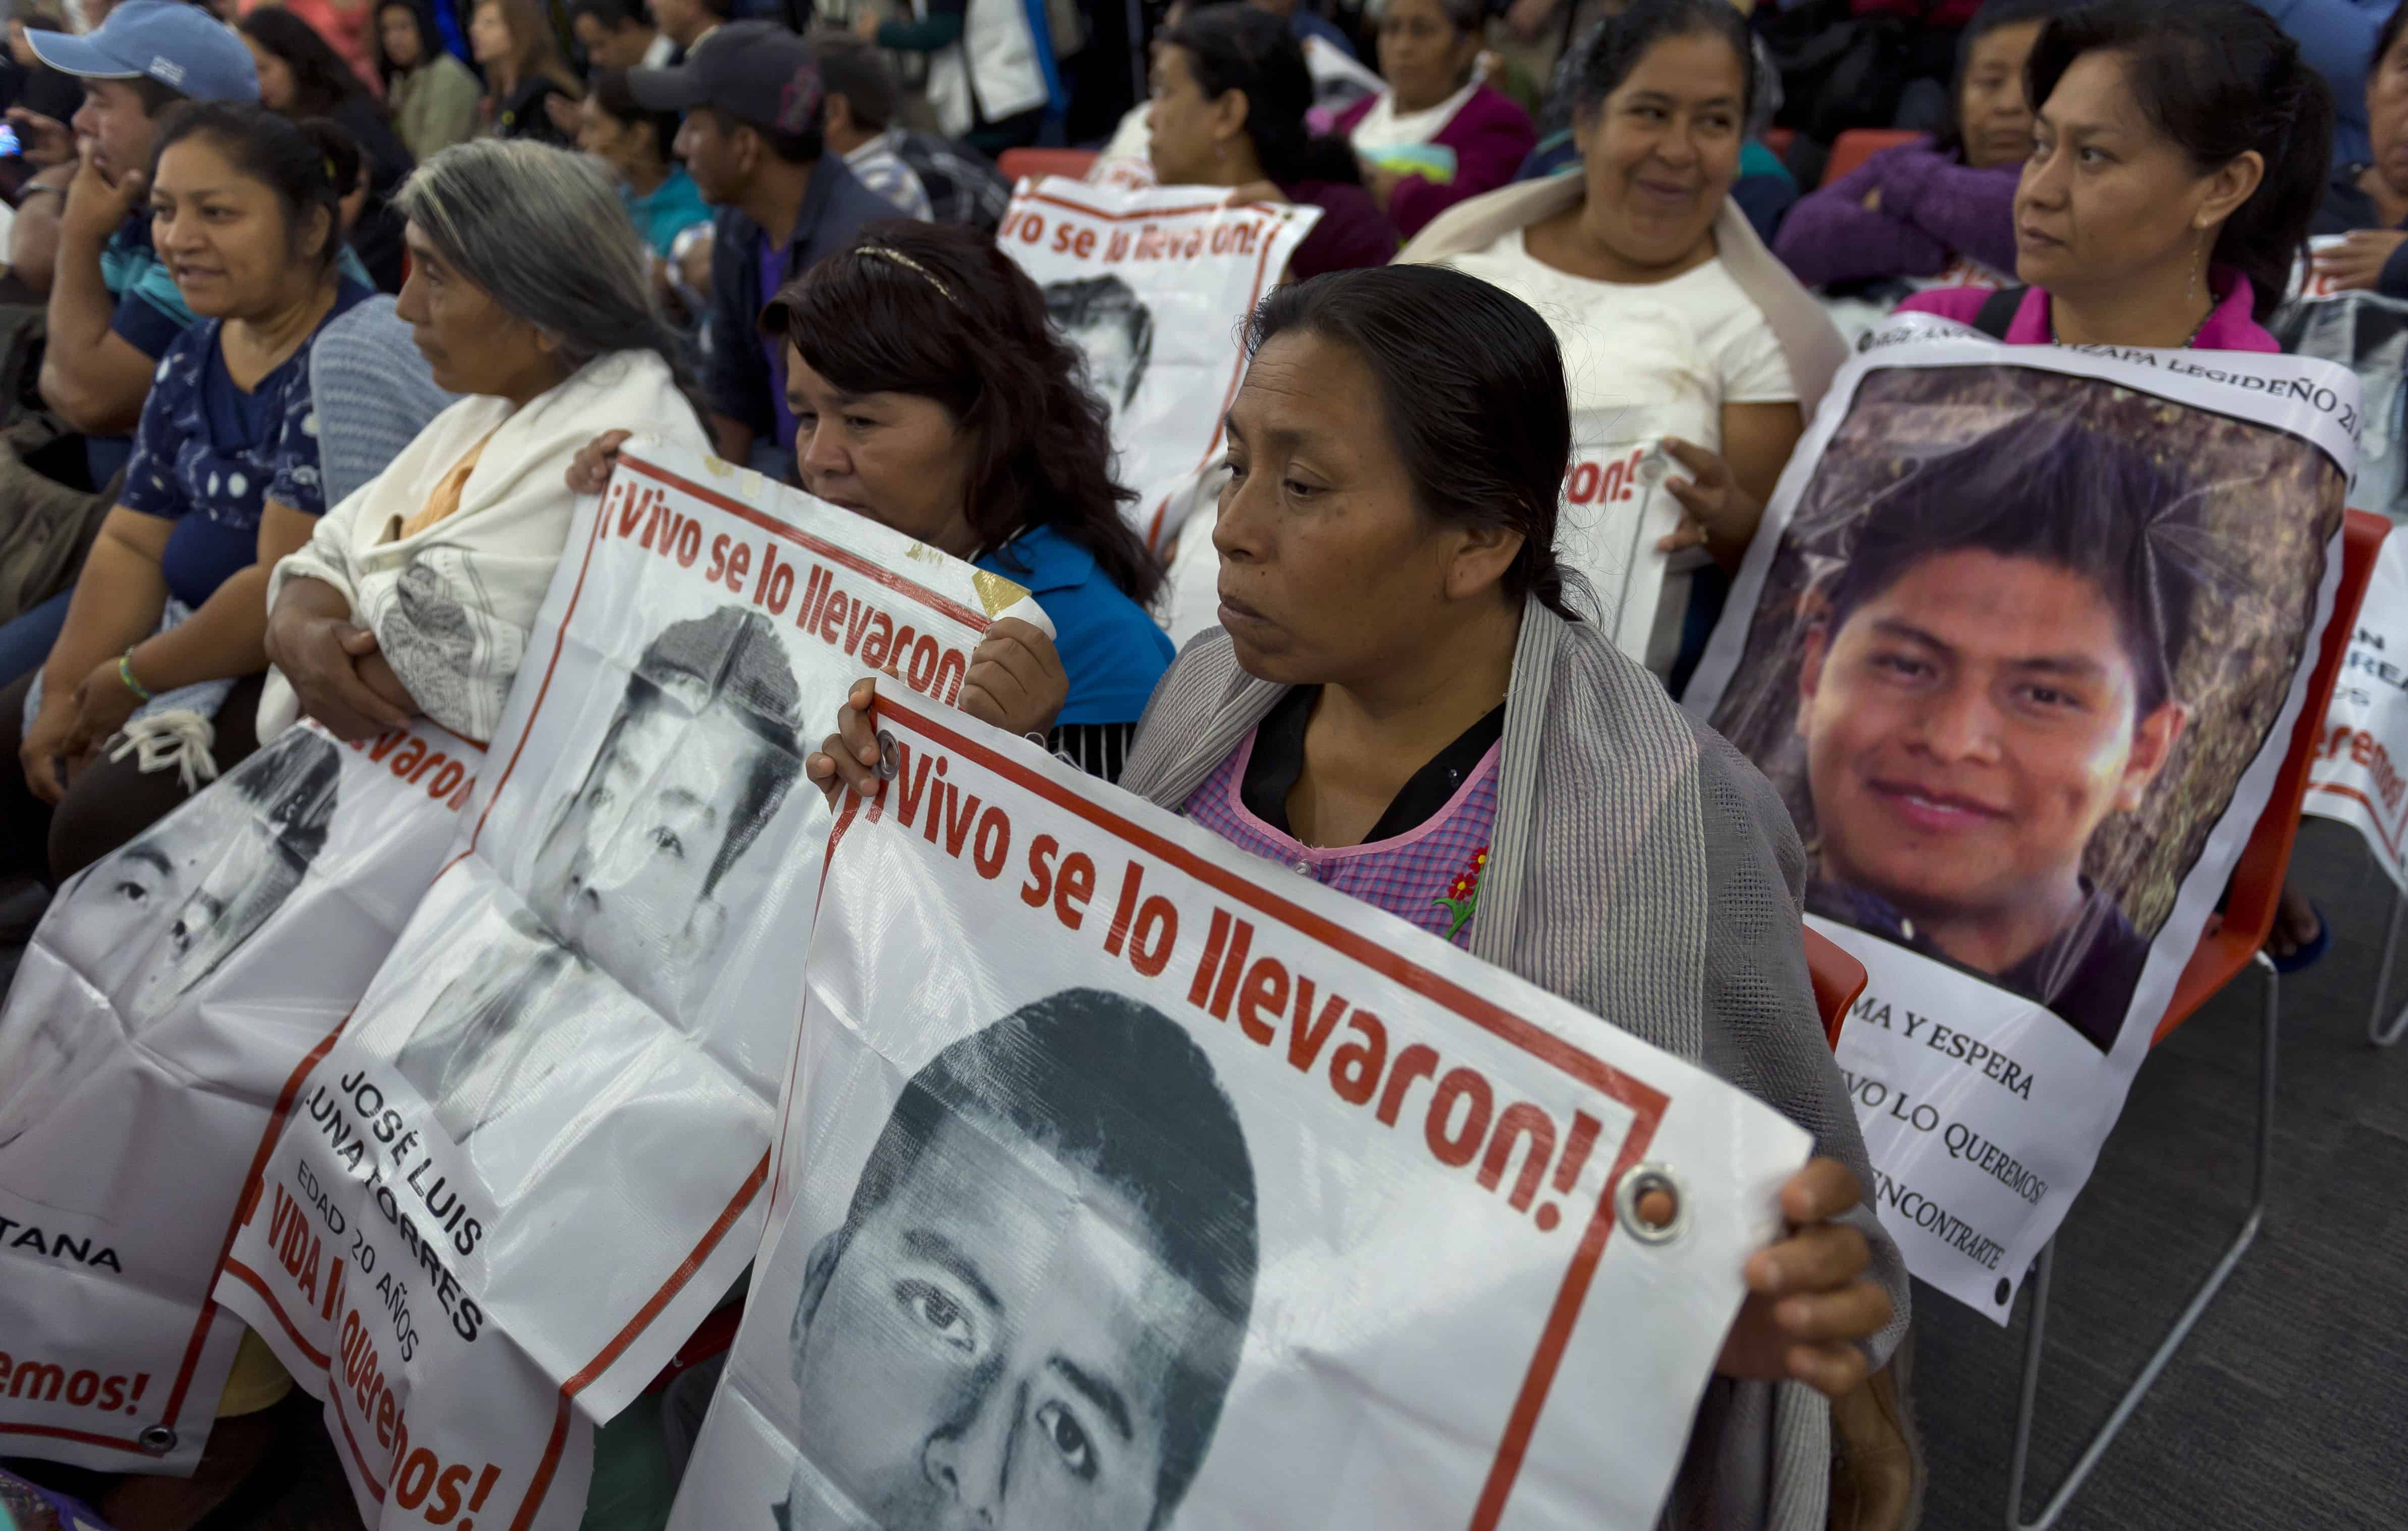 Relatives and friends of the 43 missing students of Ayotzinapa.